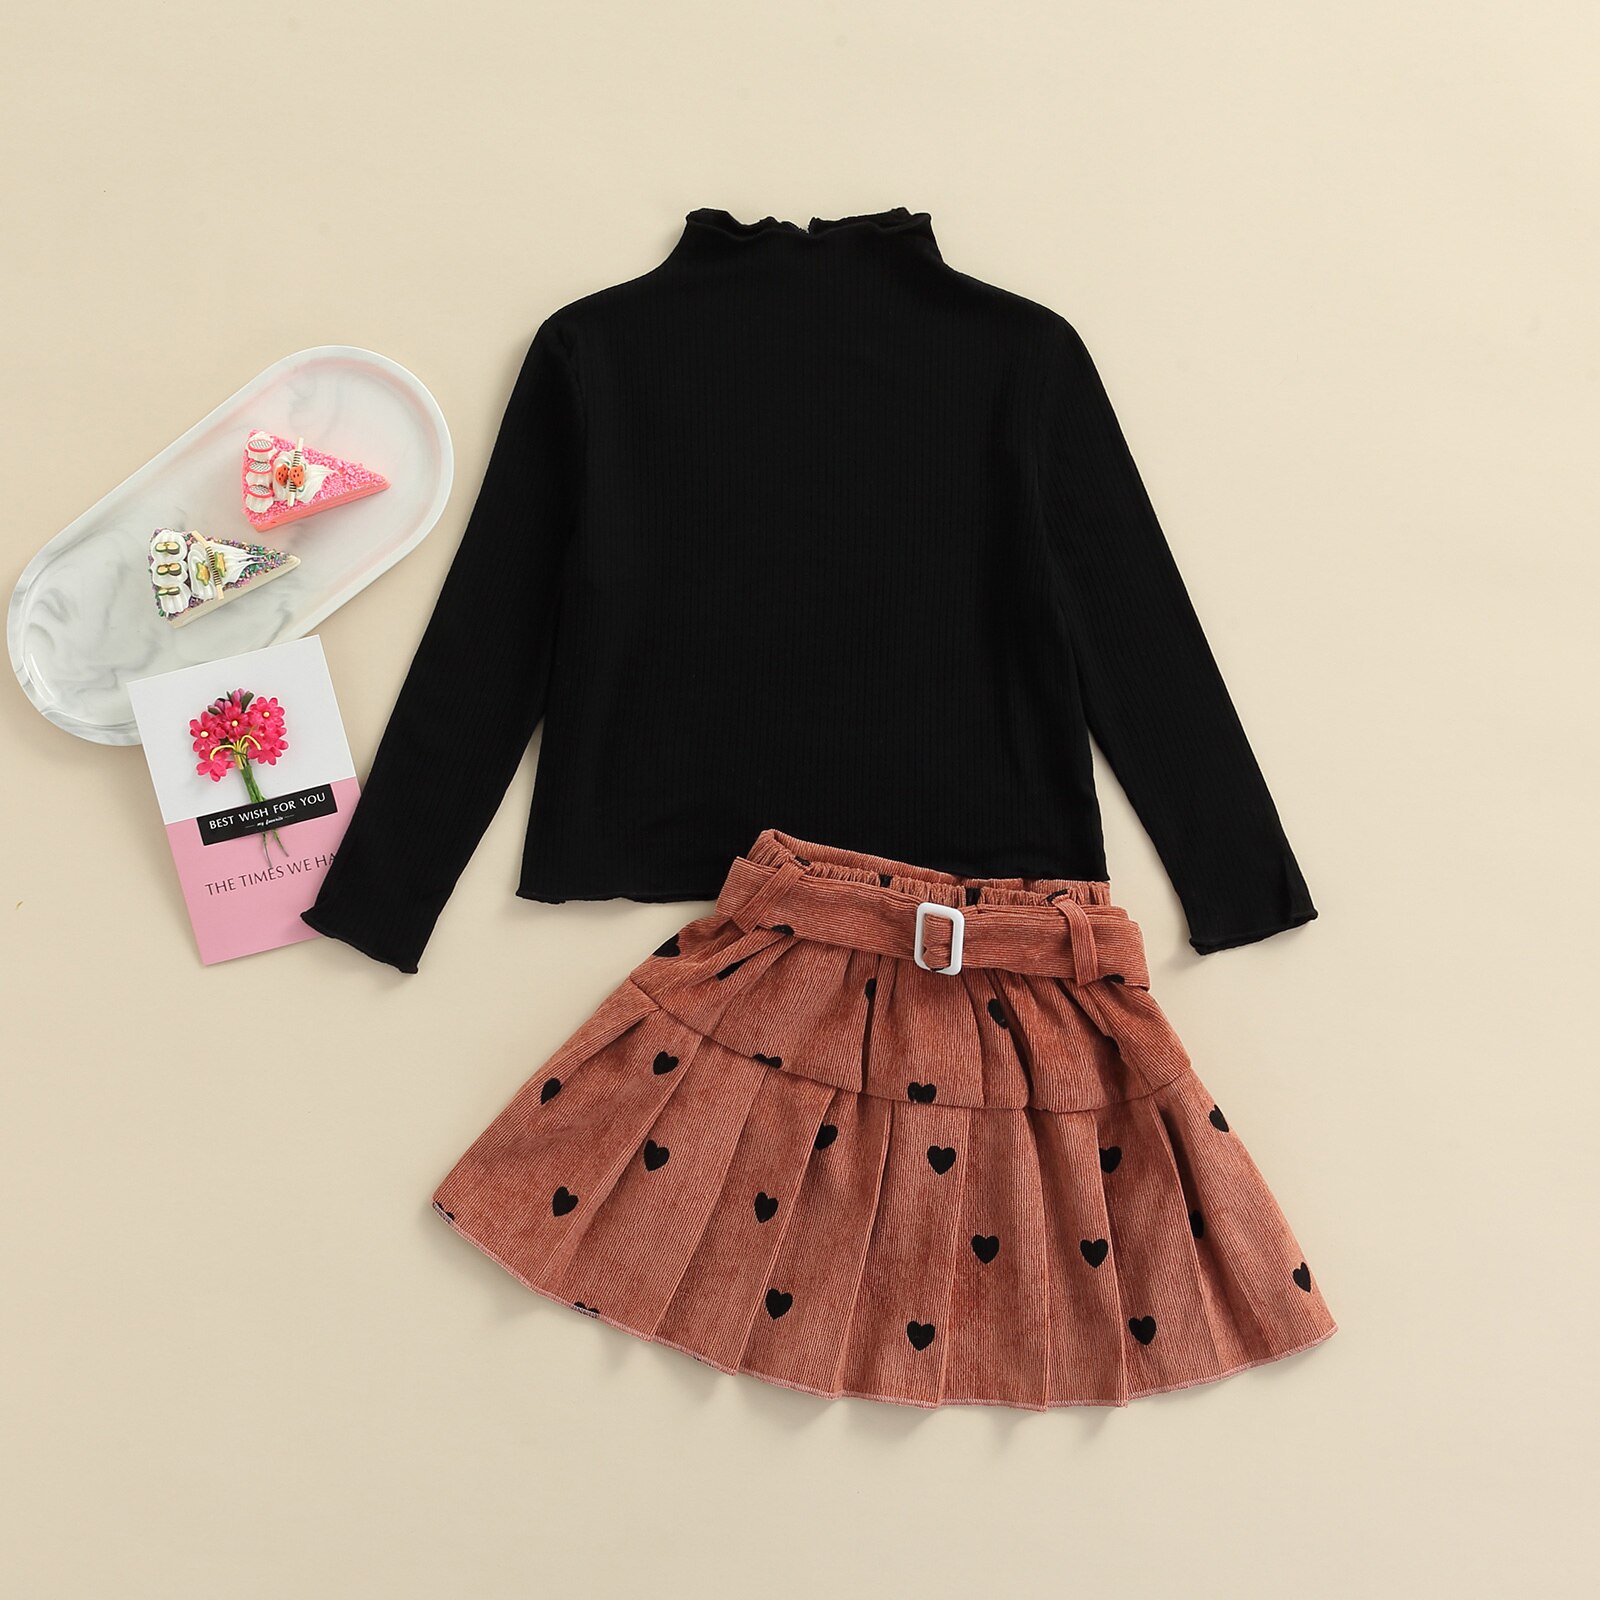 FOCUSNORM-Valentines-Days-2-7Y-Kids-Girls-Clothes-Sets-2pcs-Turtleneck-Long-Sleeve-Pullover-Tops-Heart-1